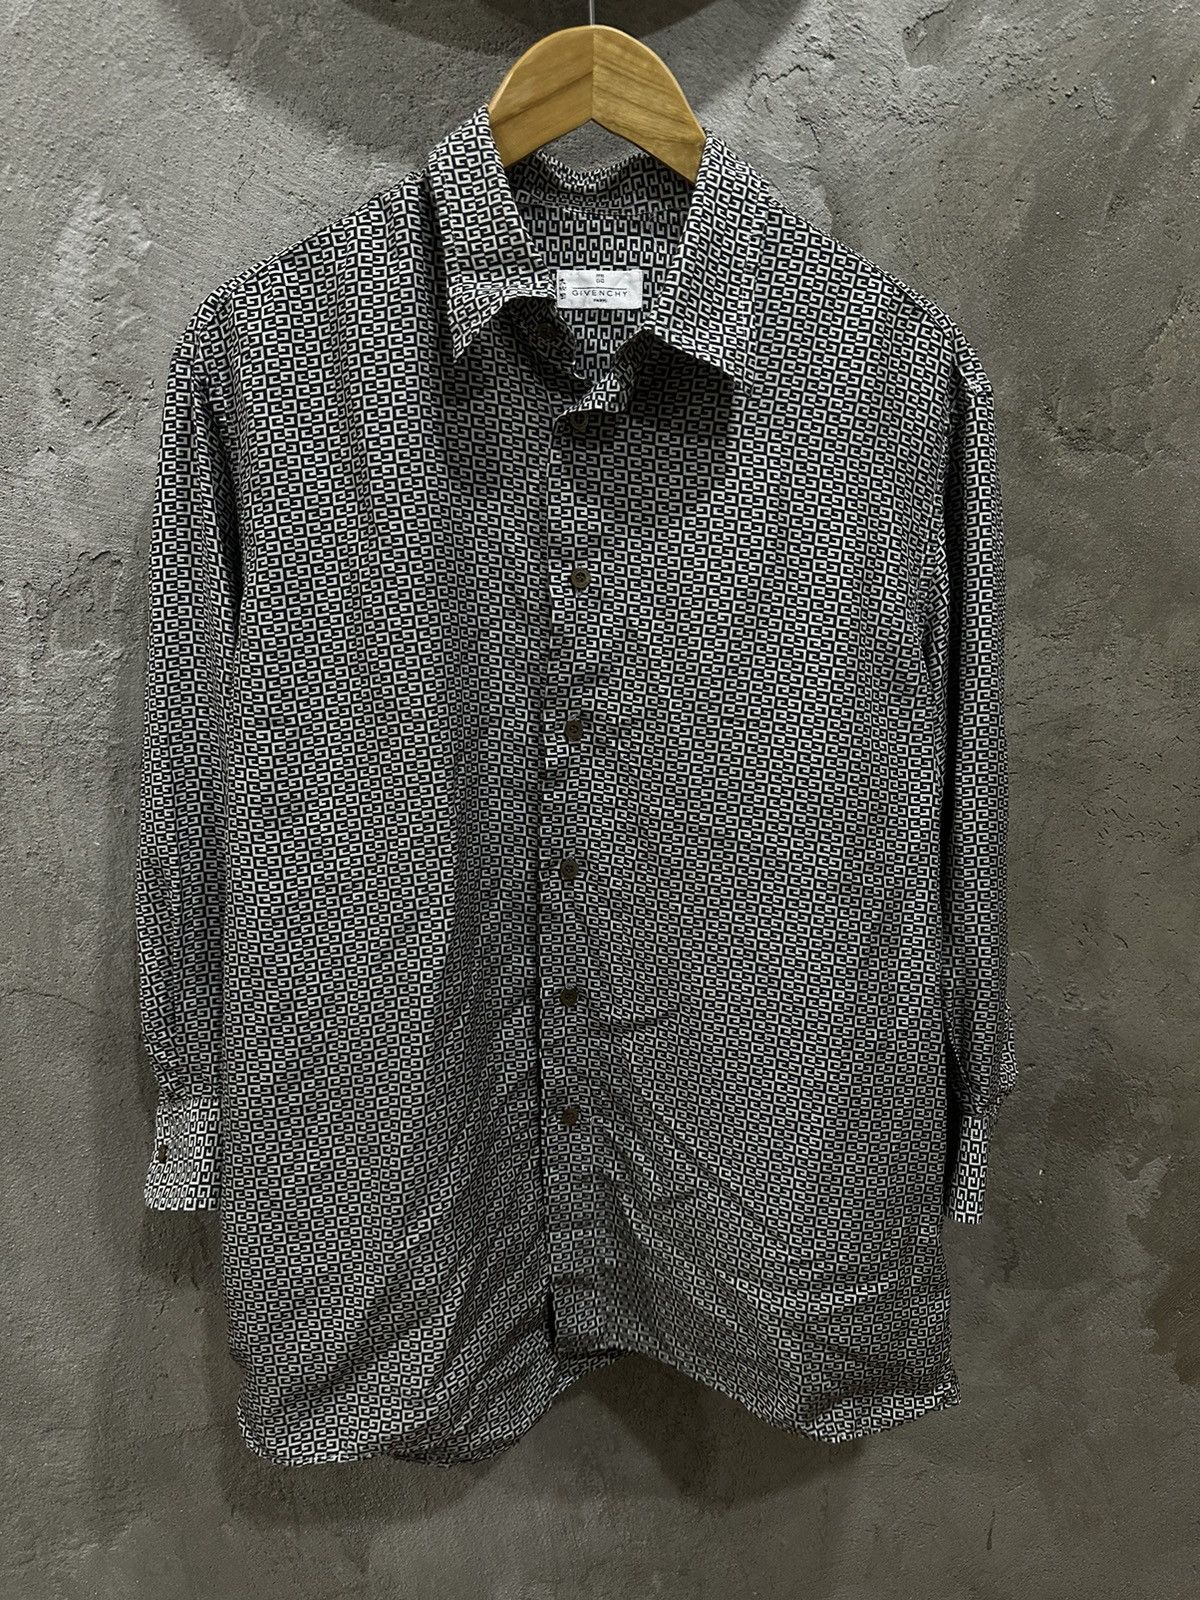 Givenchy Made in Italy Monogram Silk Button Shirt - 1